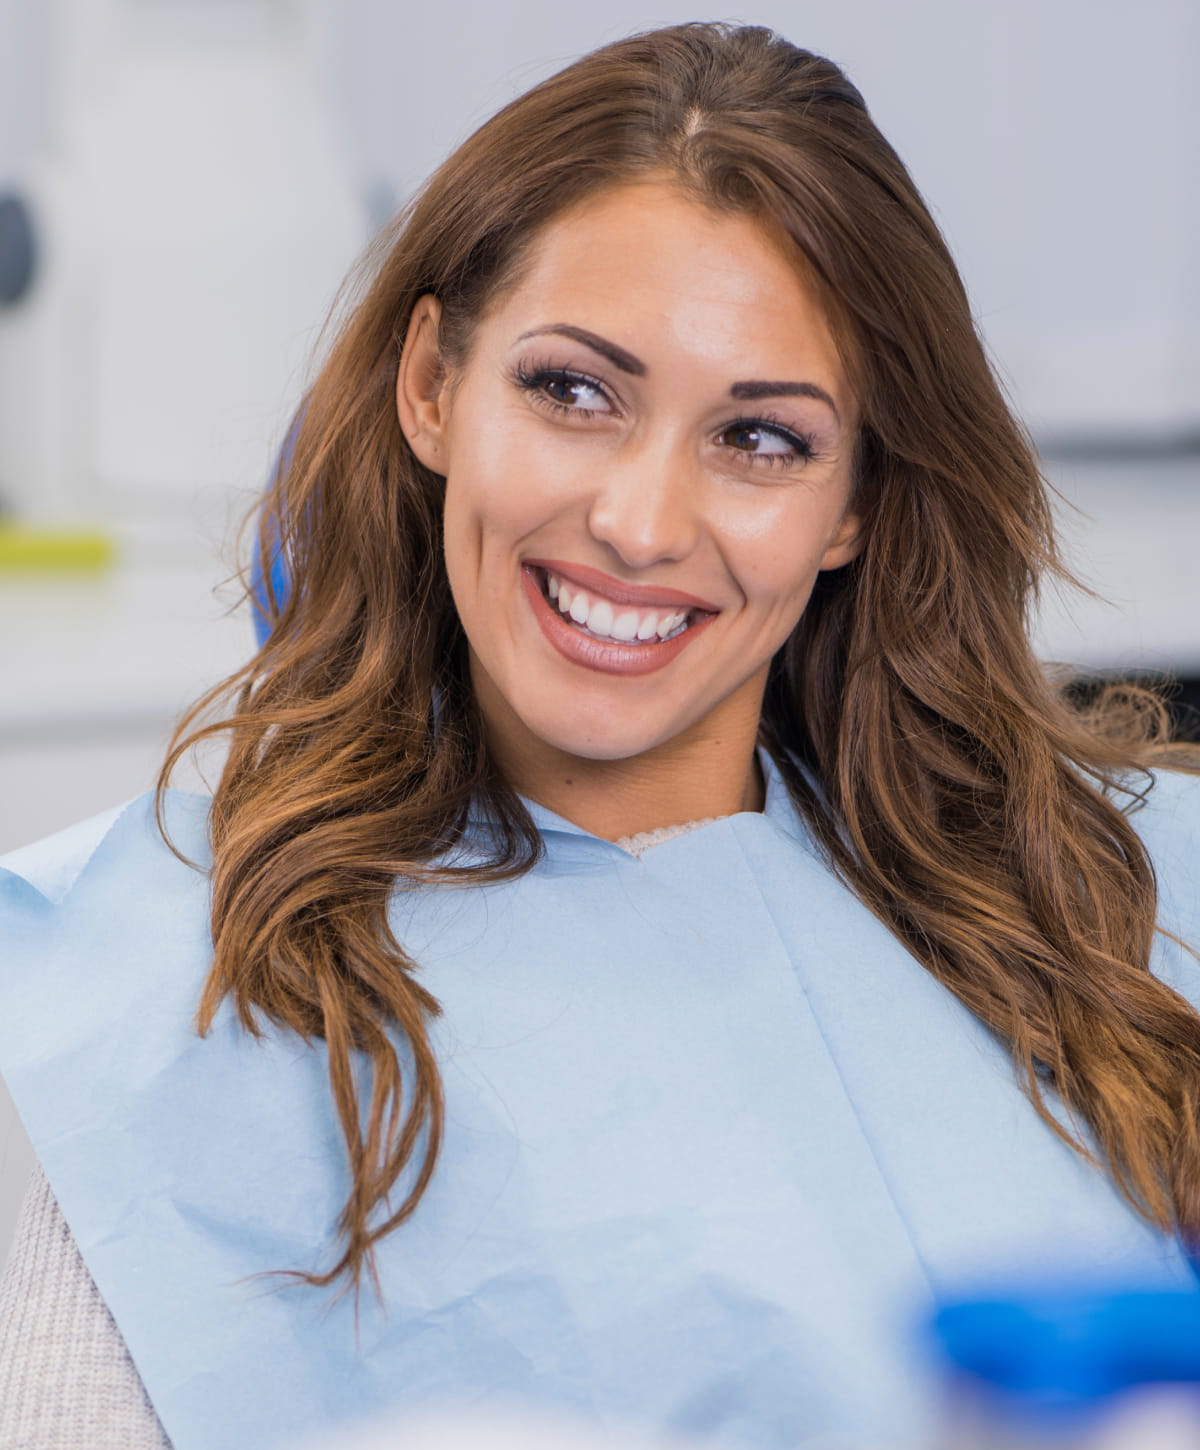 North Palm Beach Dental model for root canal